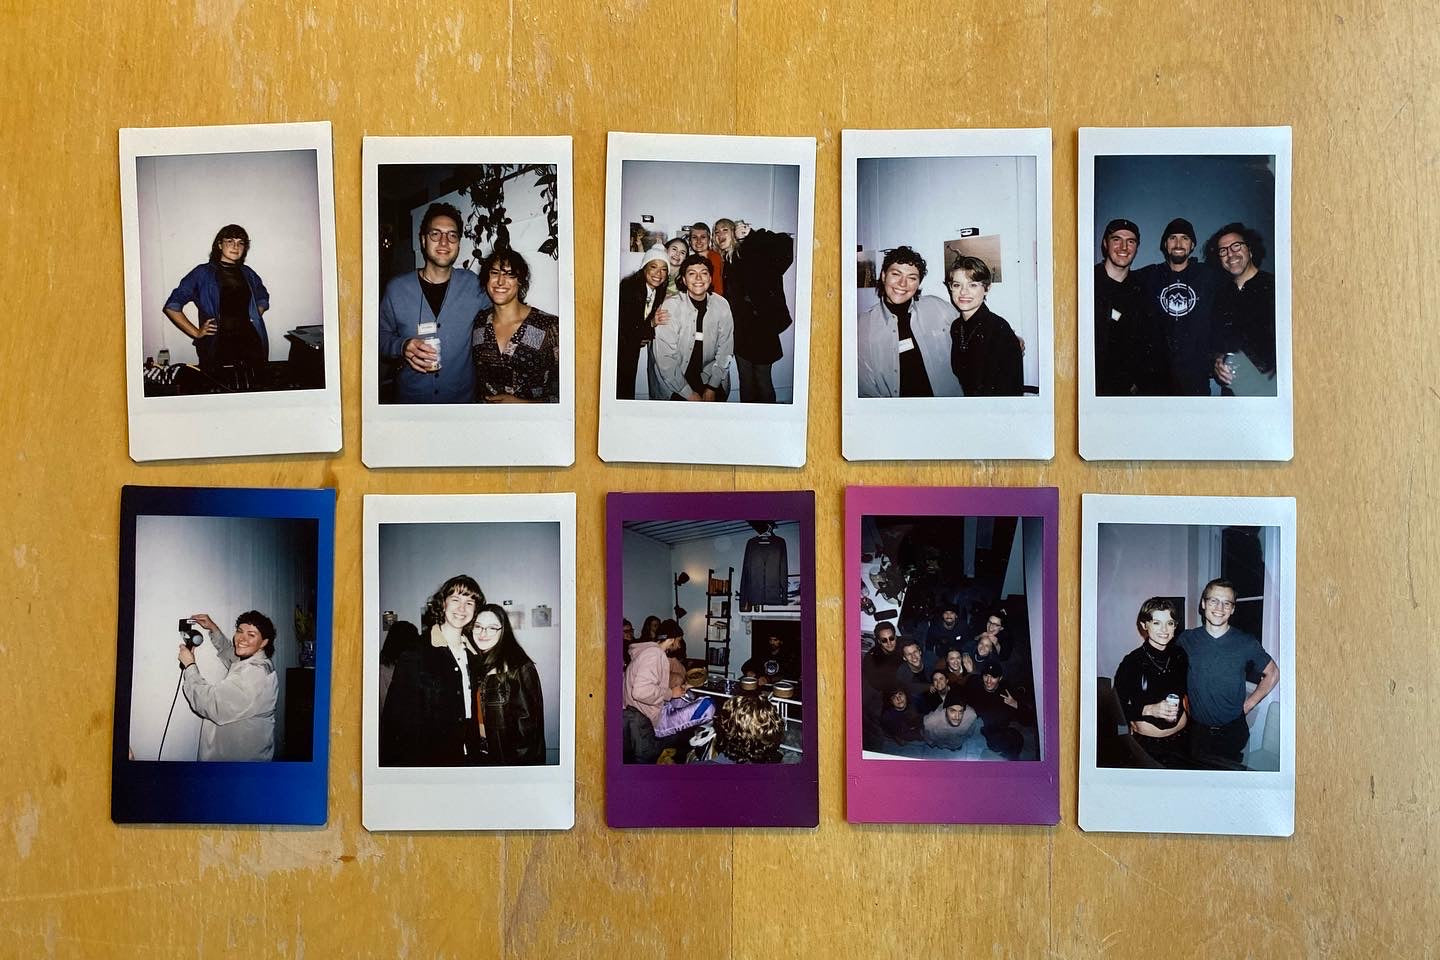 A collection of ten polaroid photos feature various guests at the event.